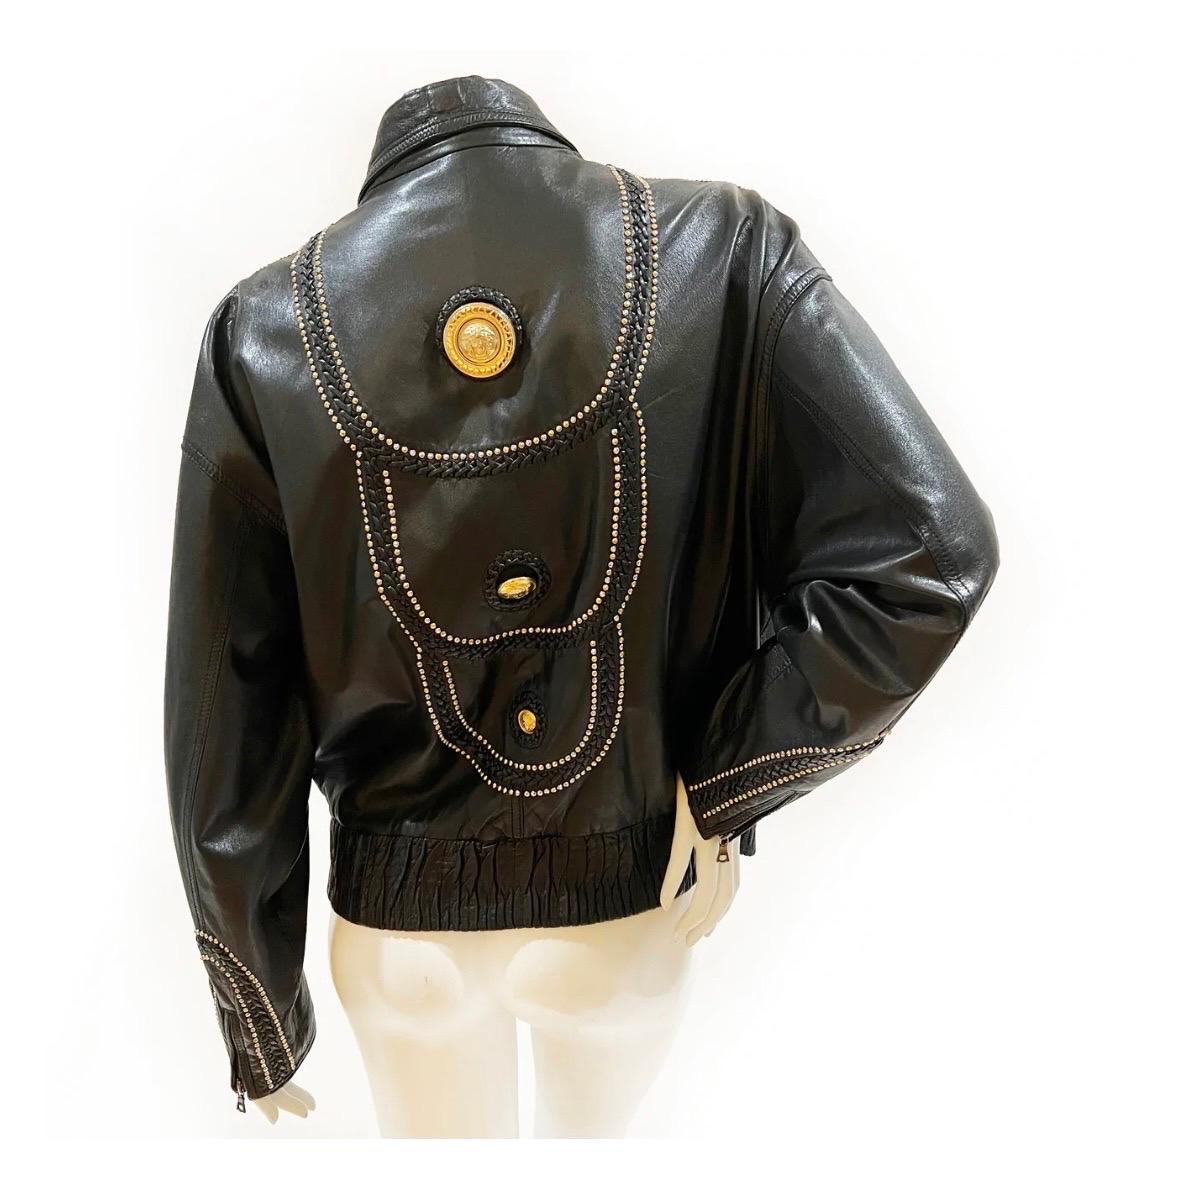 Vintage Embellished Leather Jacket by Gianni Versace
1992/1993
Made in Italy 
Black leather 
Front zip closure 
Elastic bottom hem 
Gold and silver metal stud detail
Decorative stitching throughout 
Gold-metal various sized Medusa medallions 
Dual